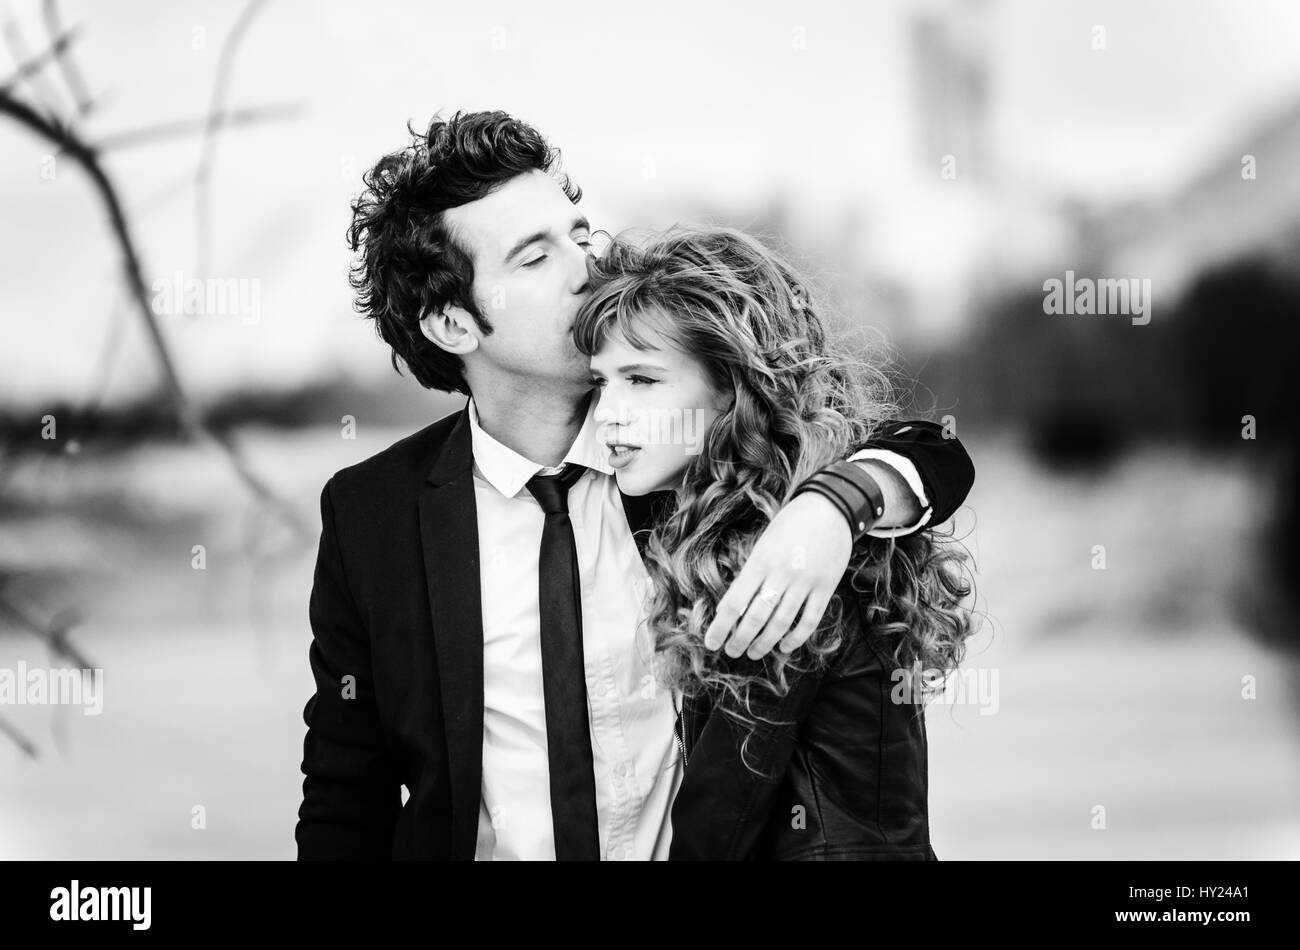 Cute couple embraces. Portrait of stylish young man in suit with tie hugs beautiful girl and kisses. Successful relationship and happy moments concept Stock Photo